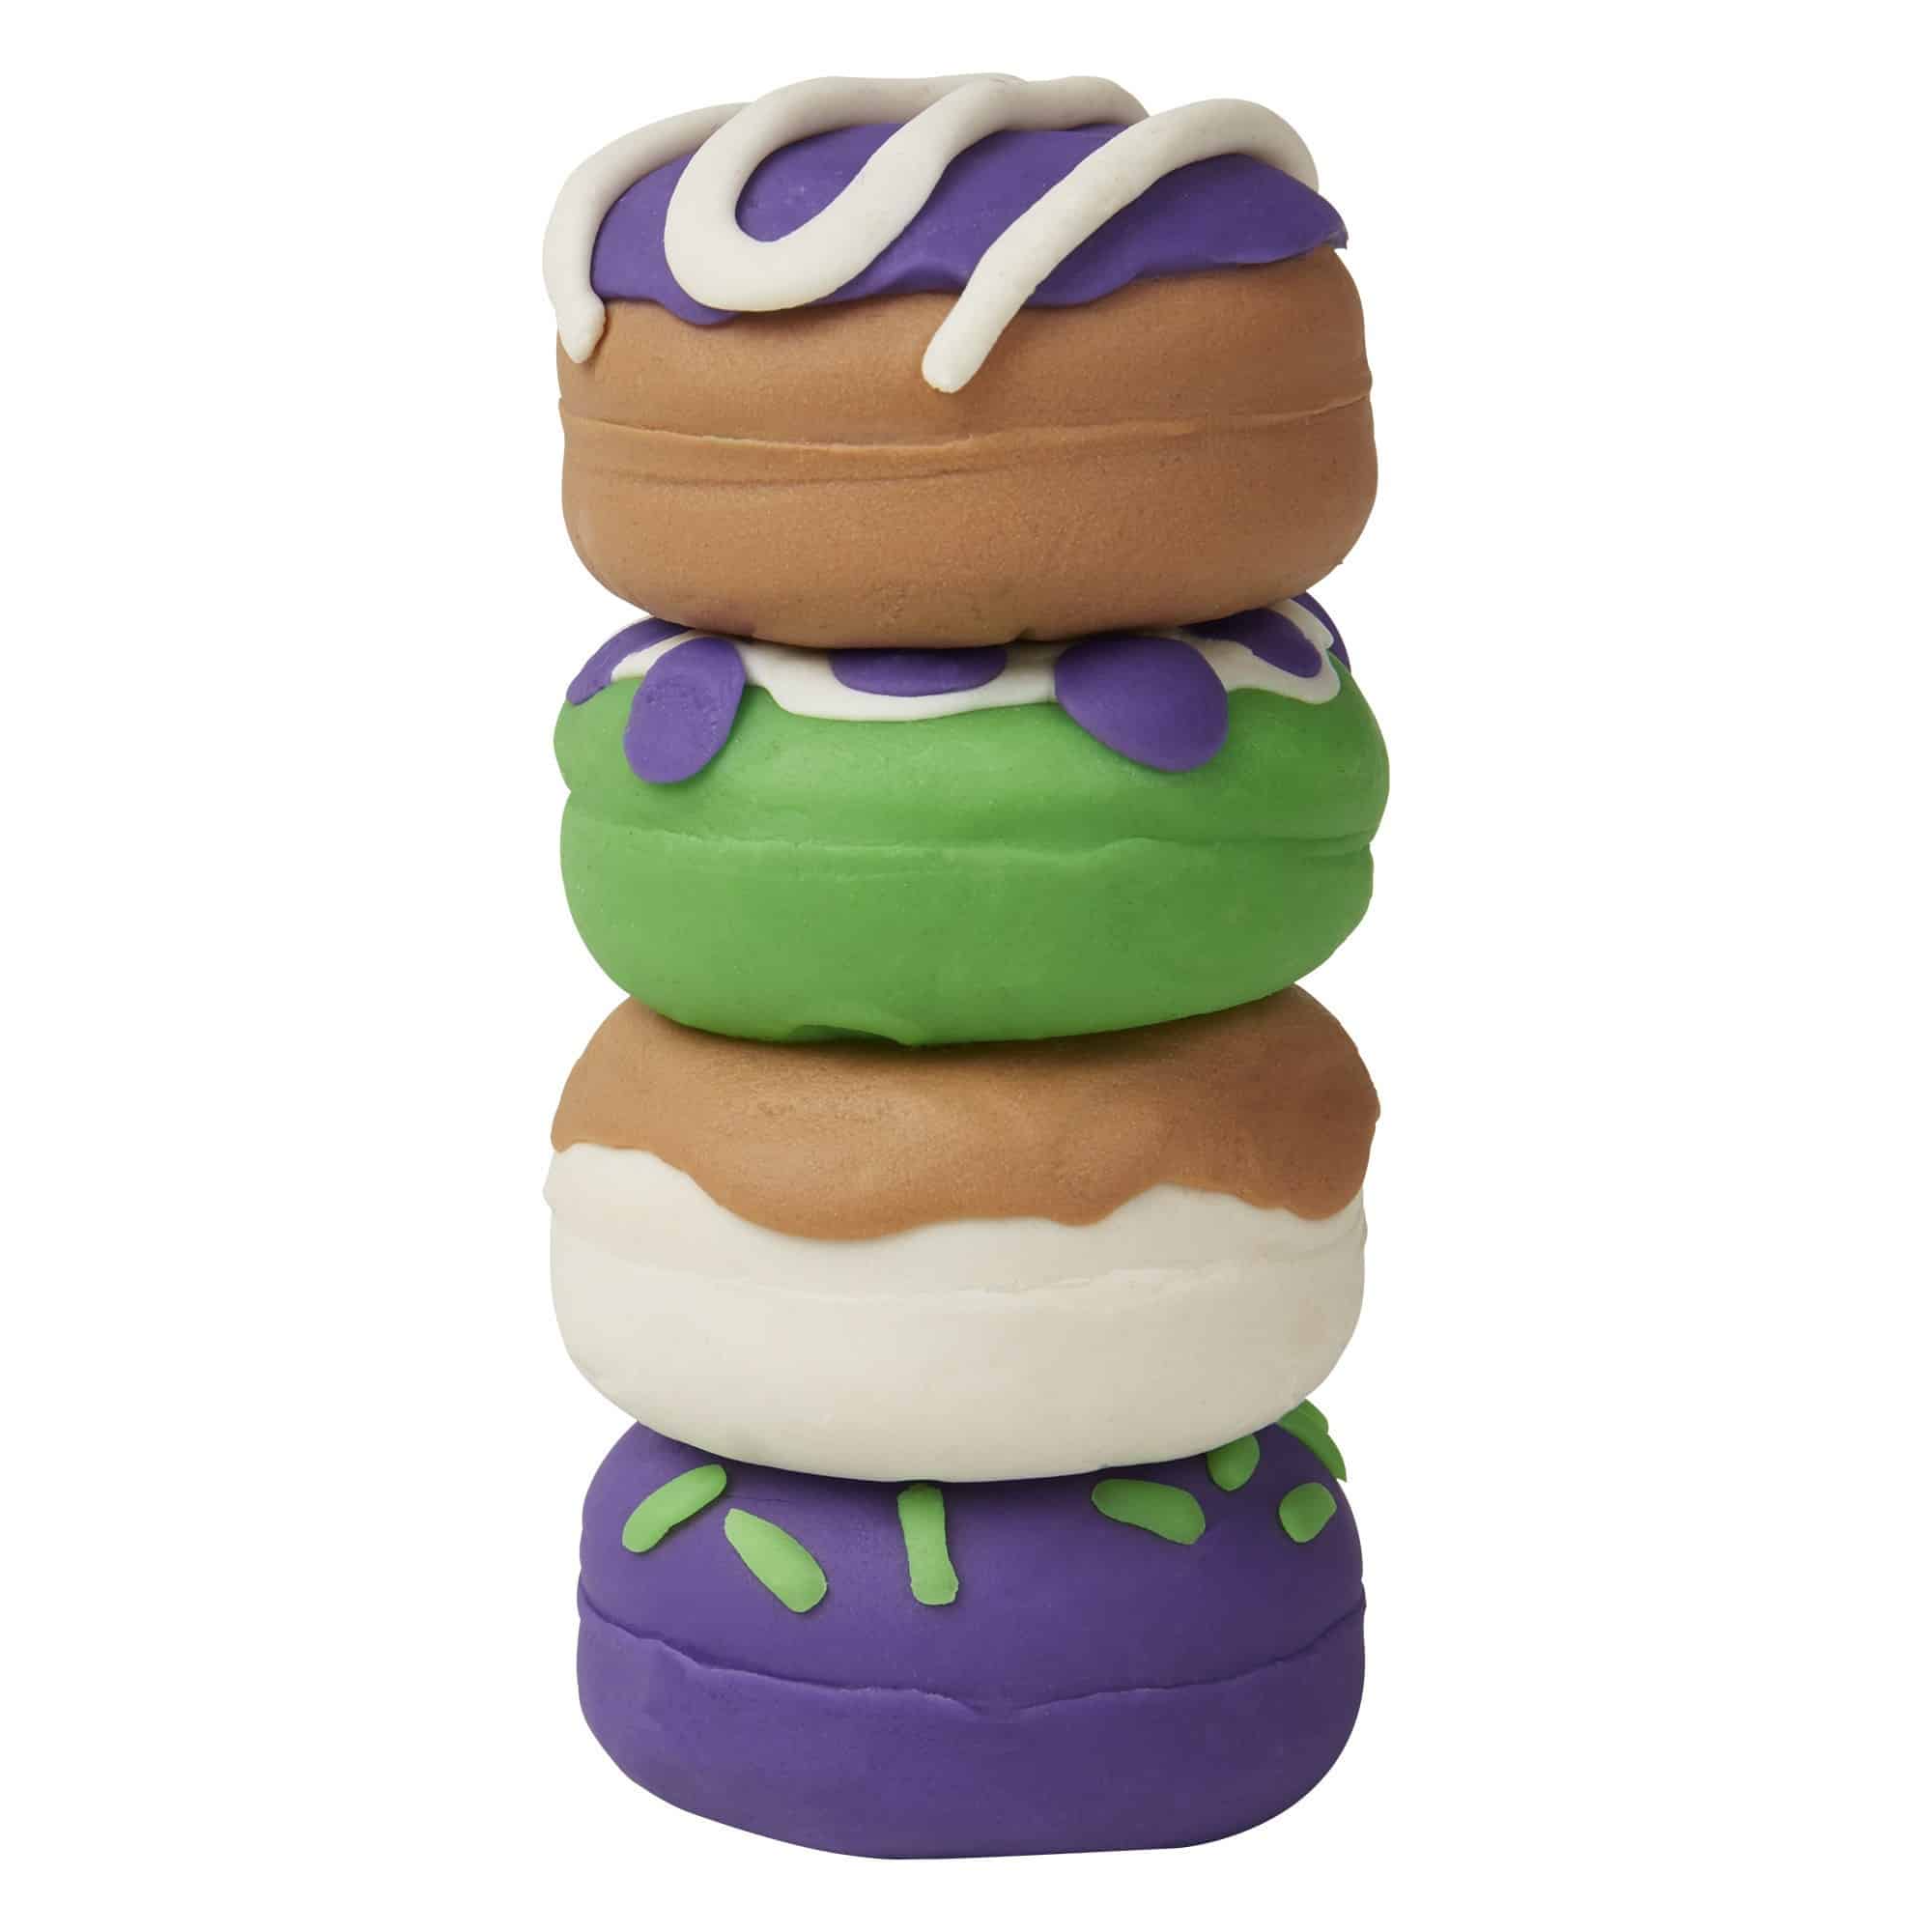 Play-Doh - Kitchen Creations - Delightful Donuts Set